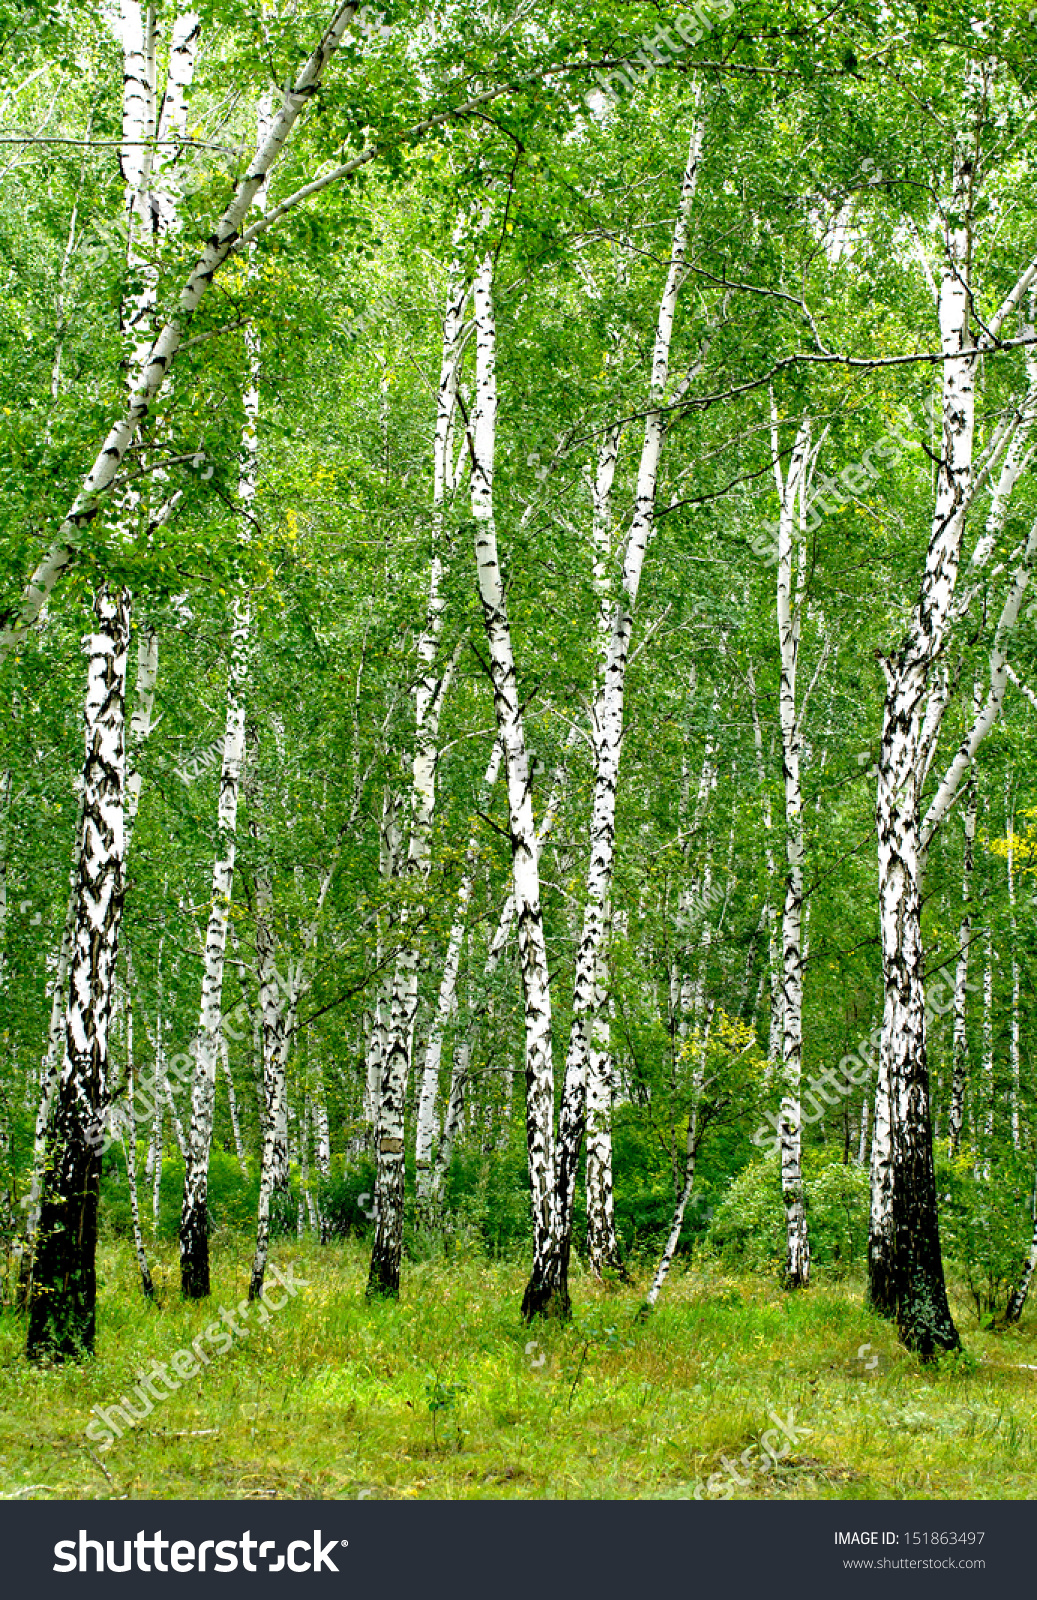 White Birch Trees In The Forest In Summer Stock Photo 151863497 ...